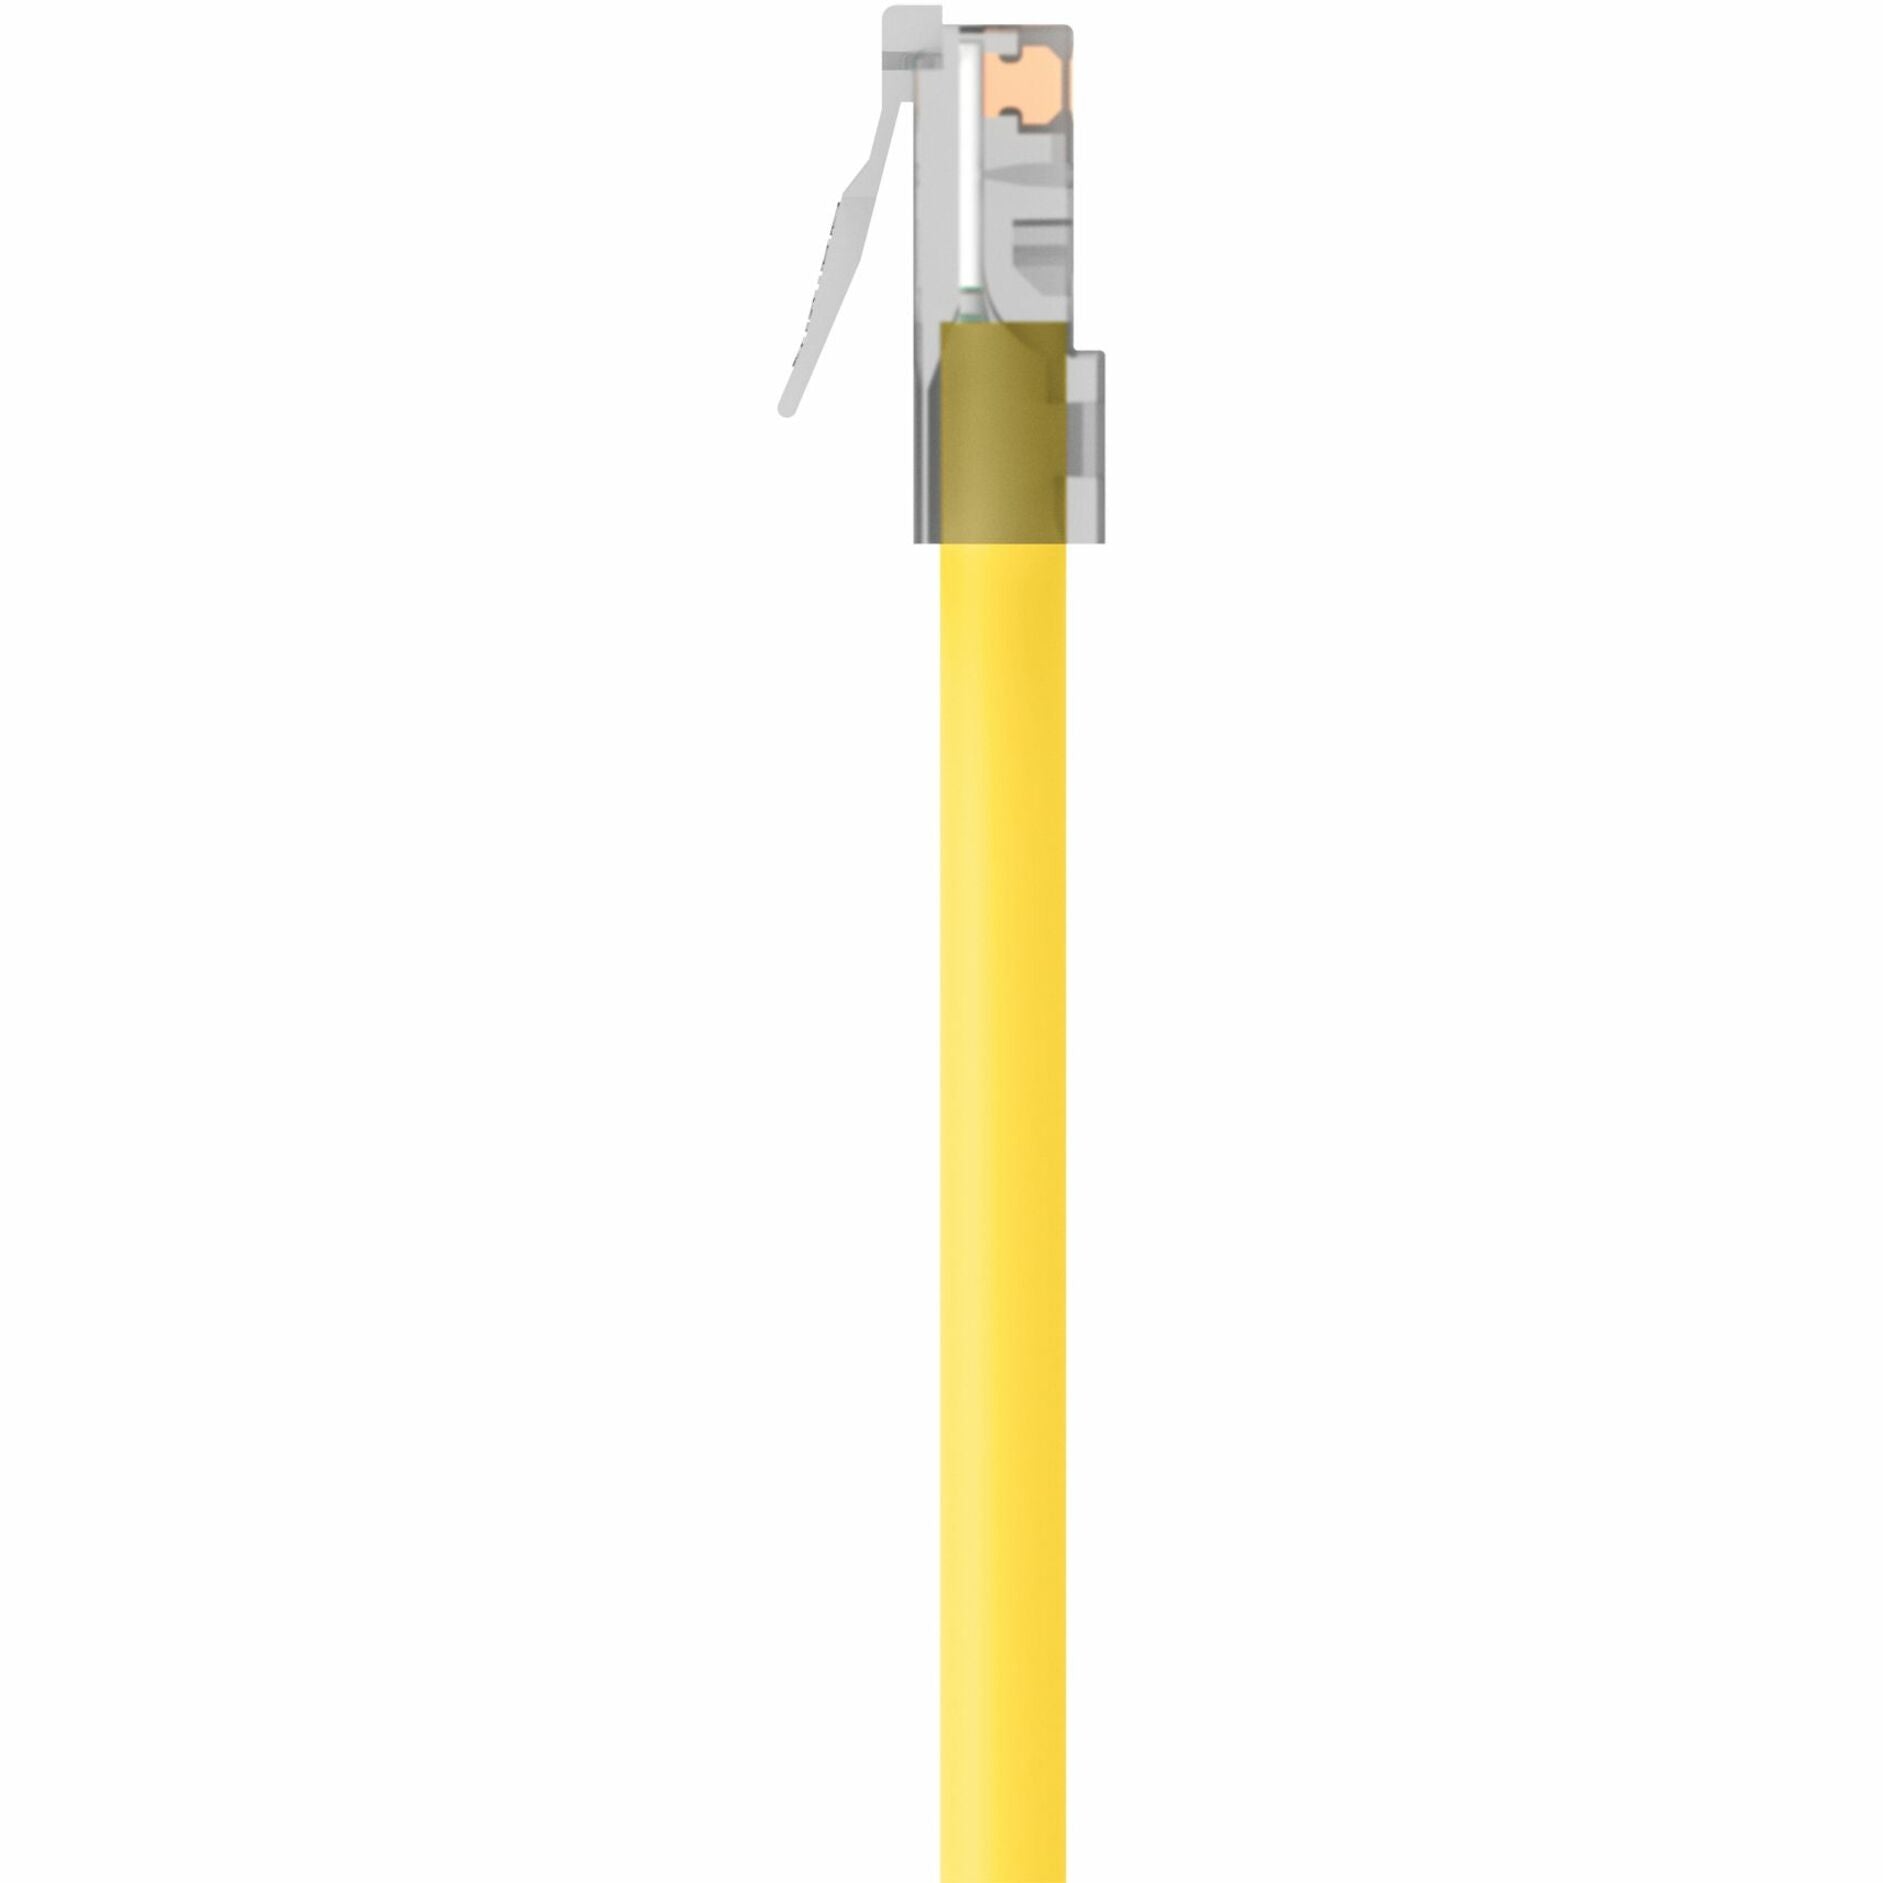 Belkin A3L980-12-YLW CAT6 Ethernet Patch Cable, RJ45, M/M, 12 ft, Yellow